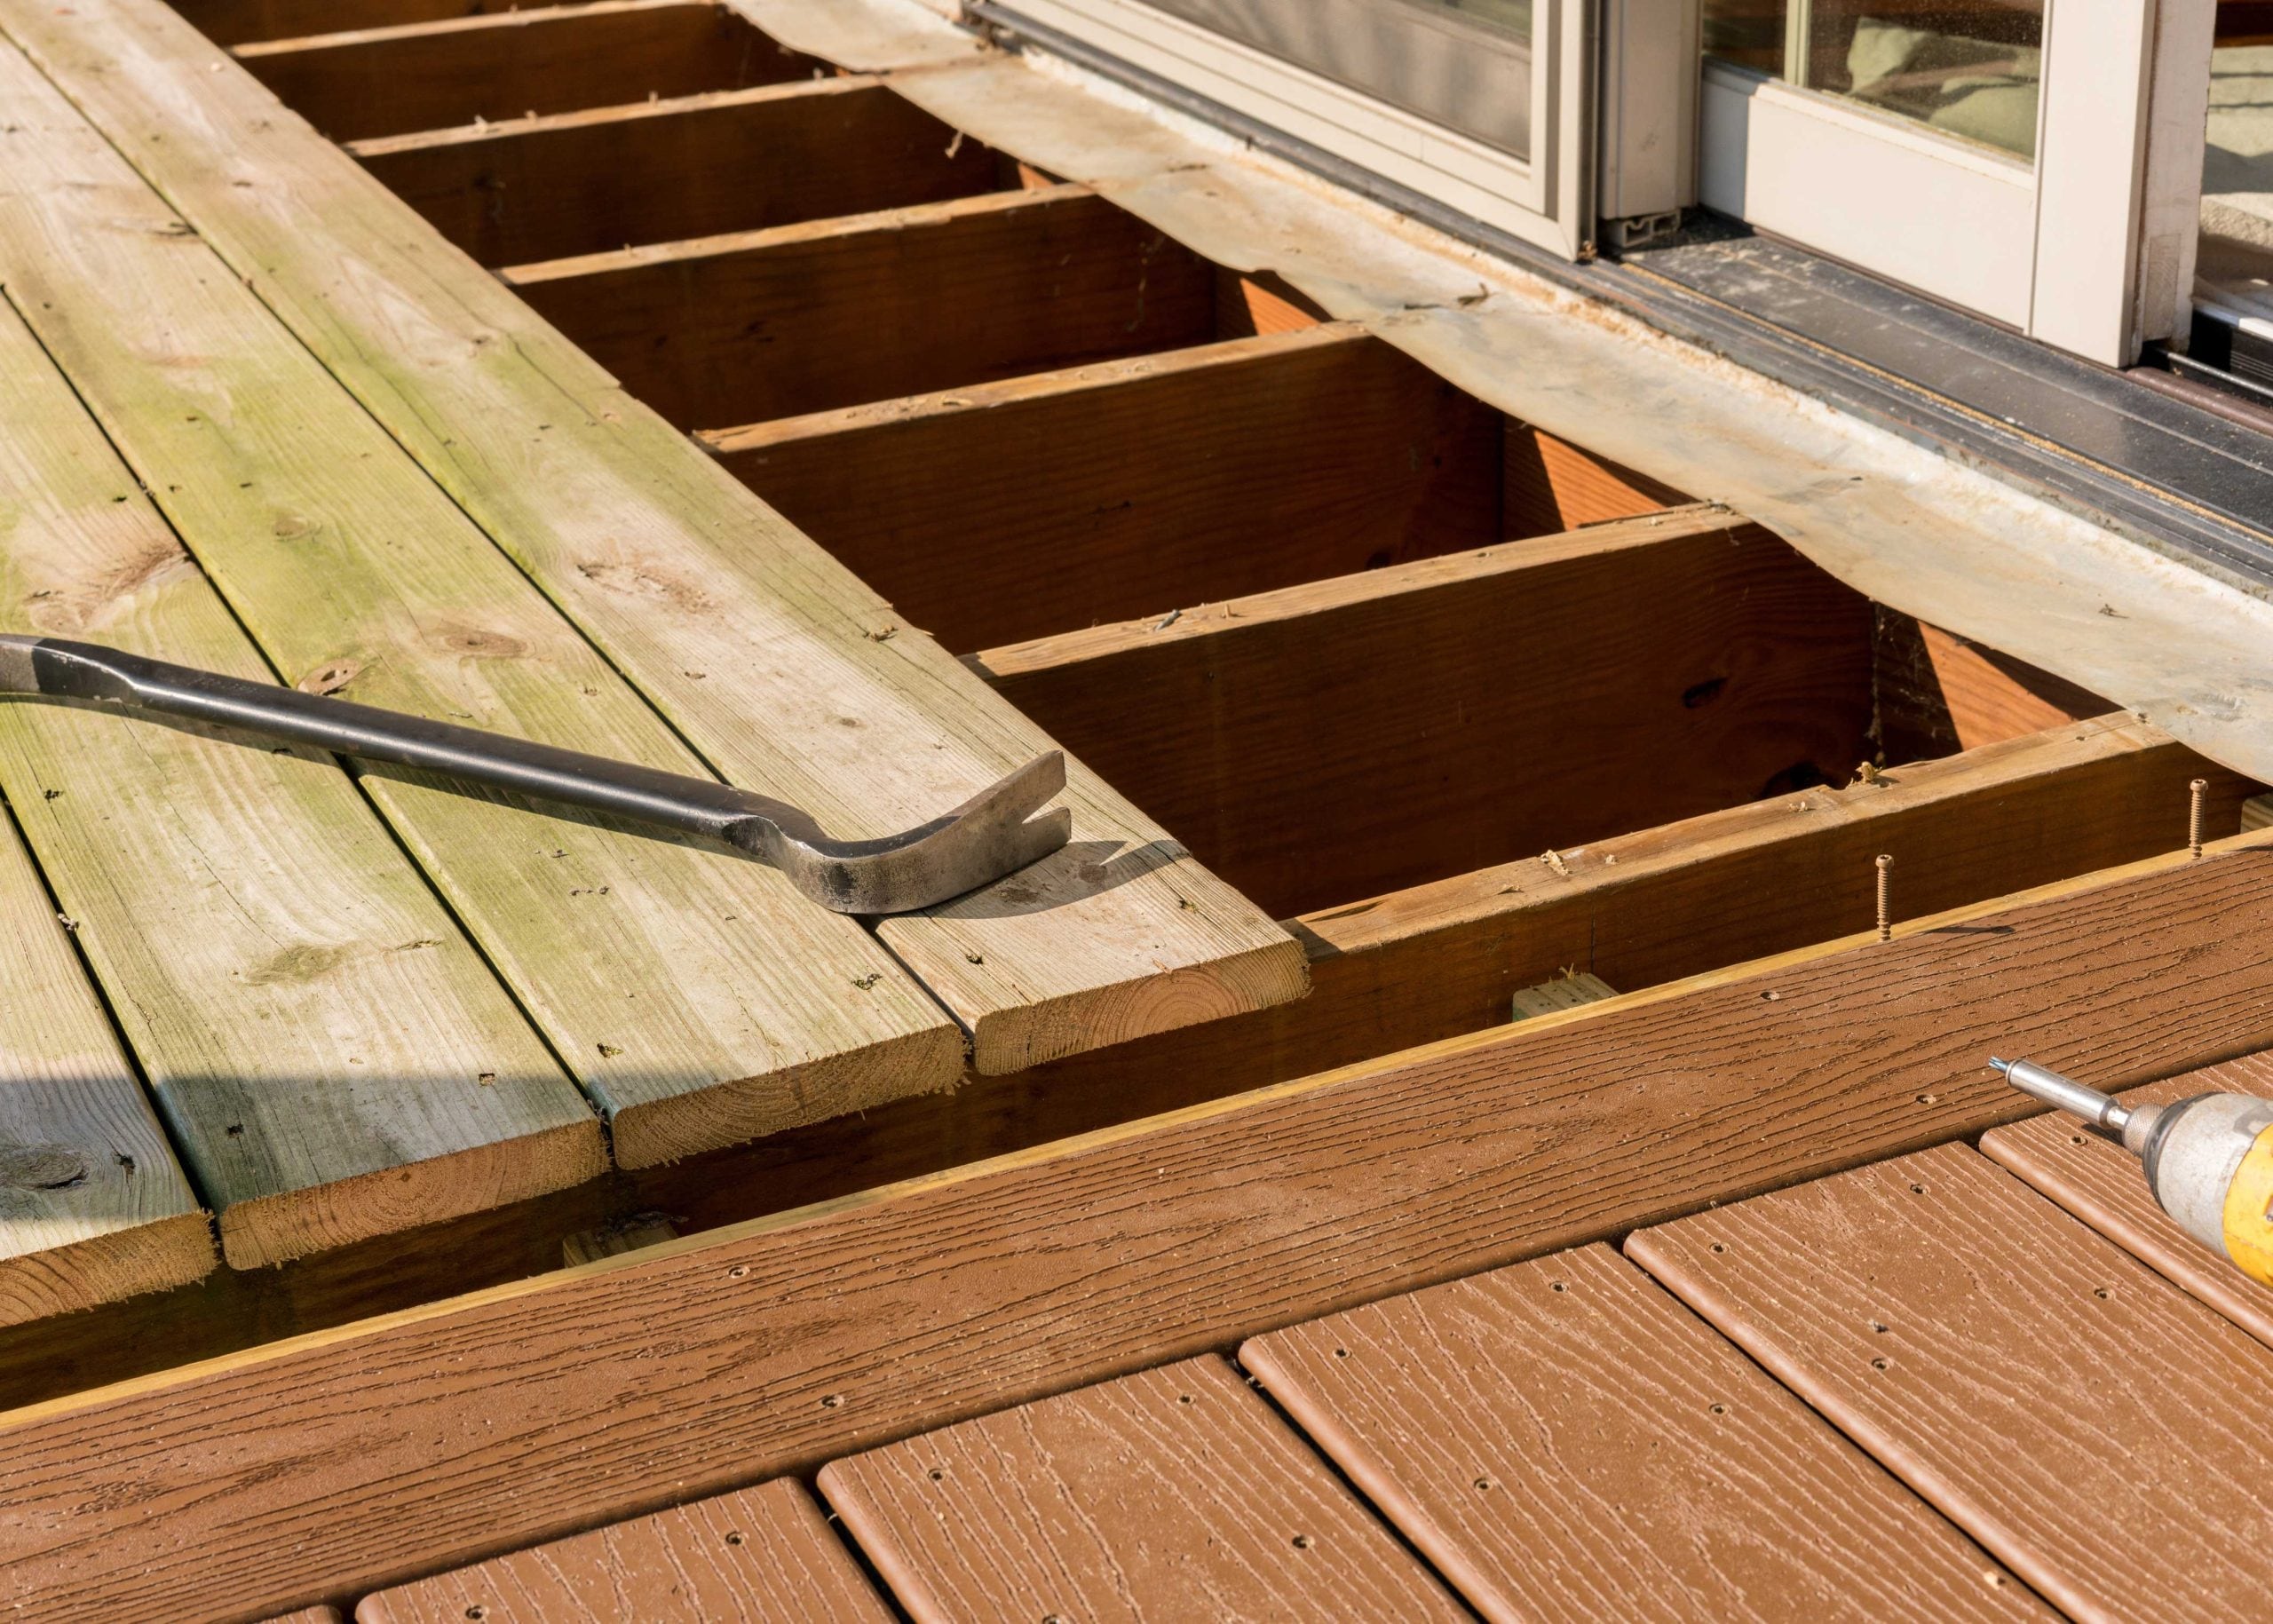 Common deck issues that may require deck repair or new installation.